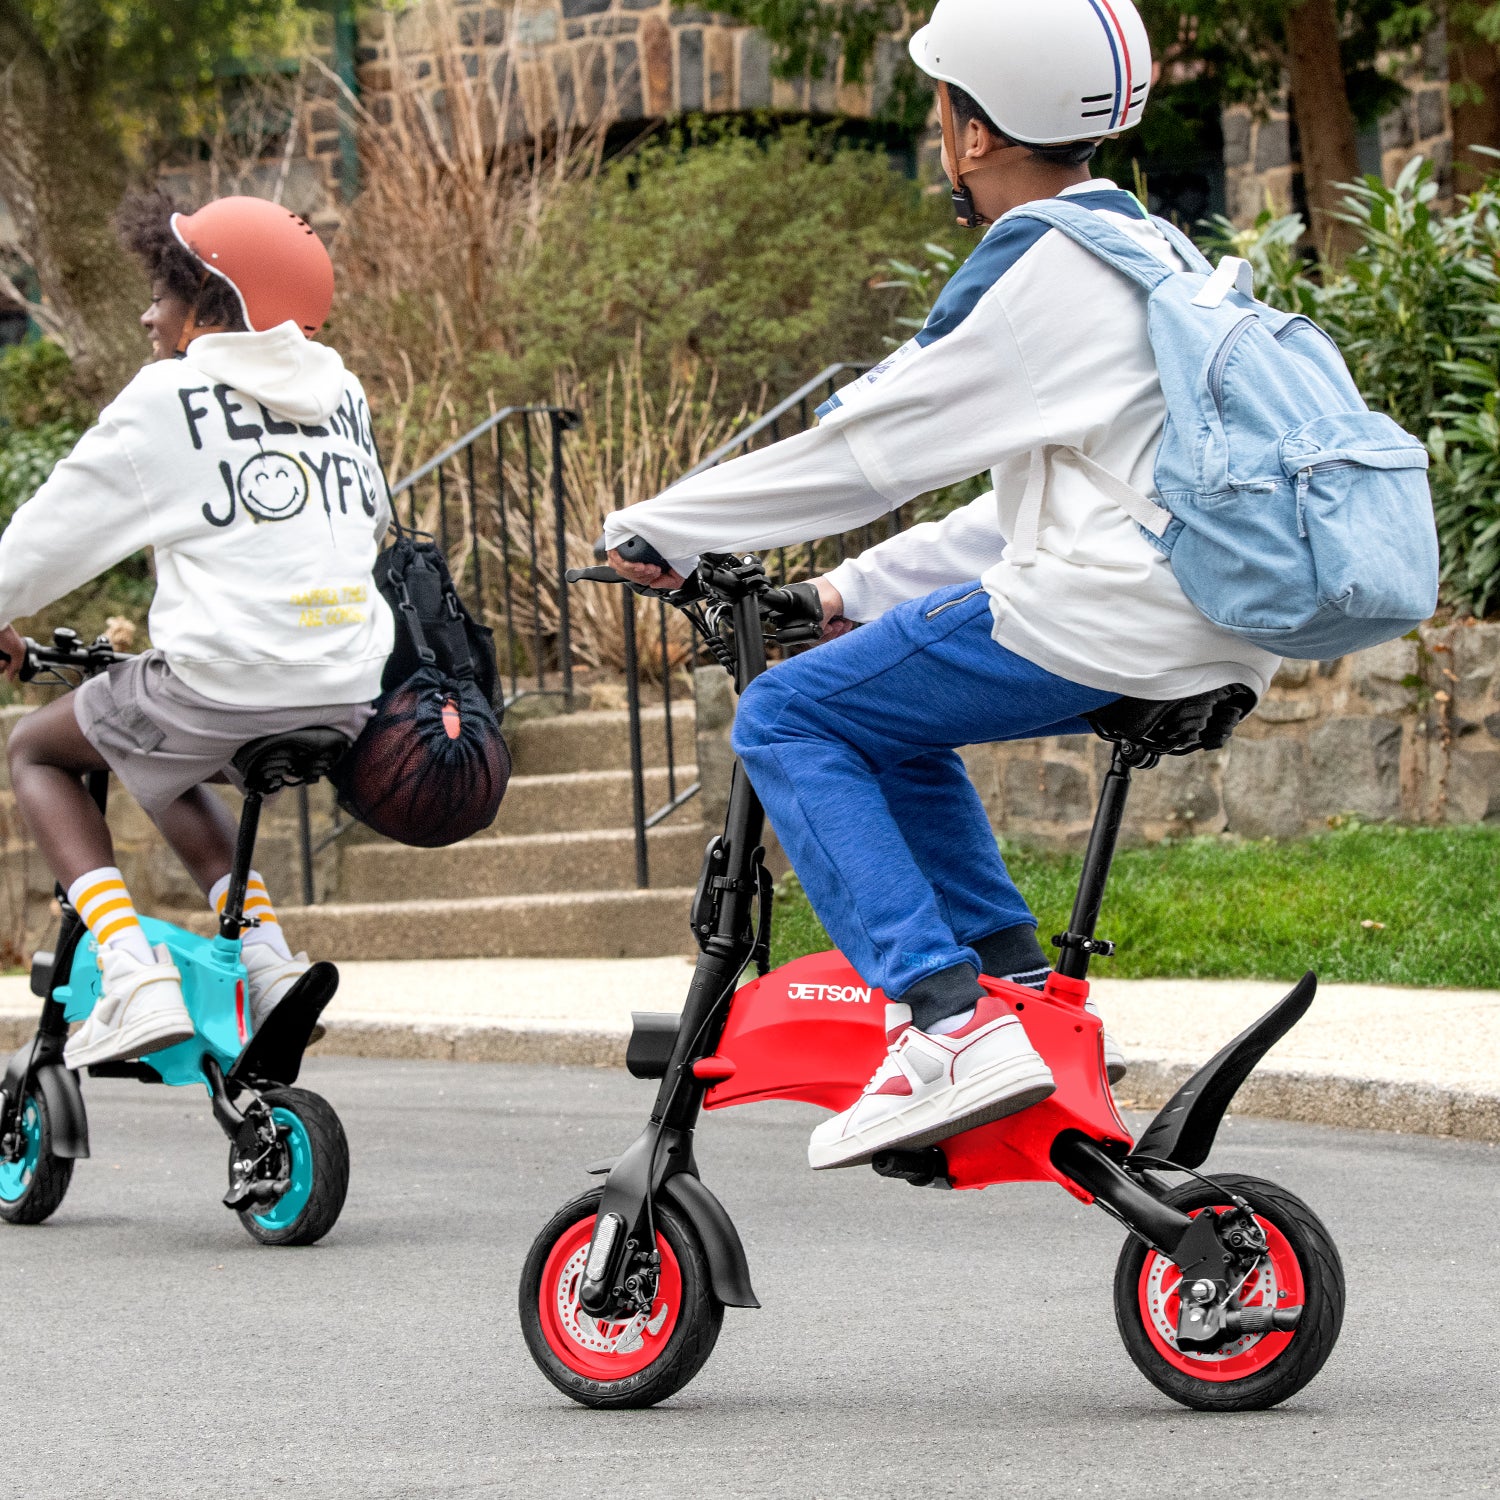 two people riding the blue and red LX10s out on the street